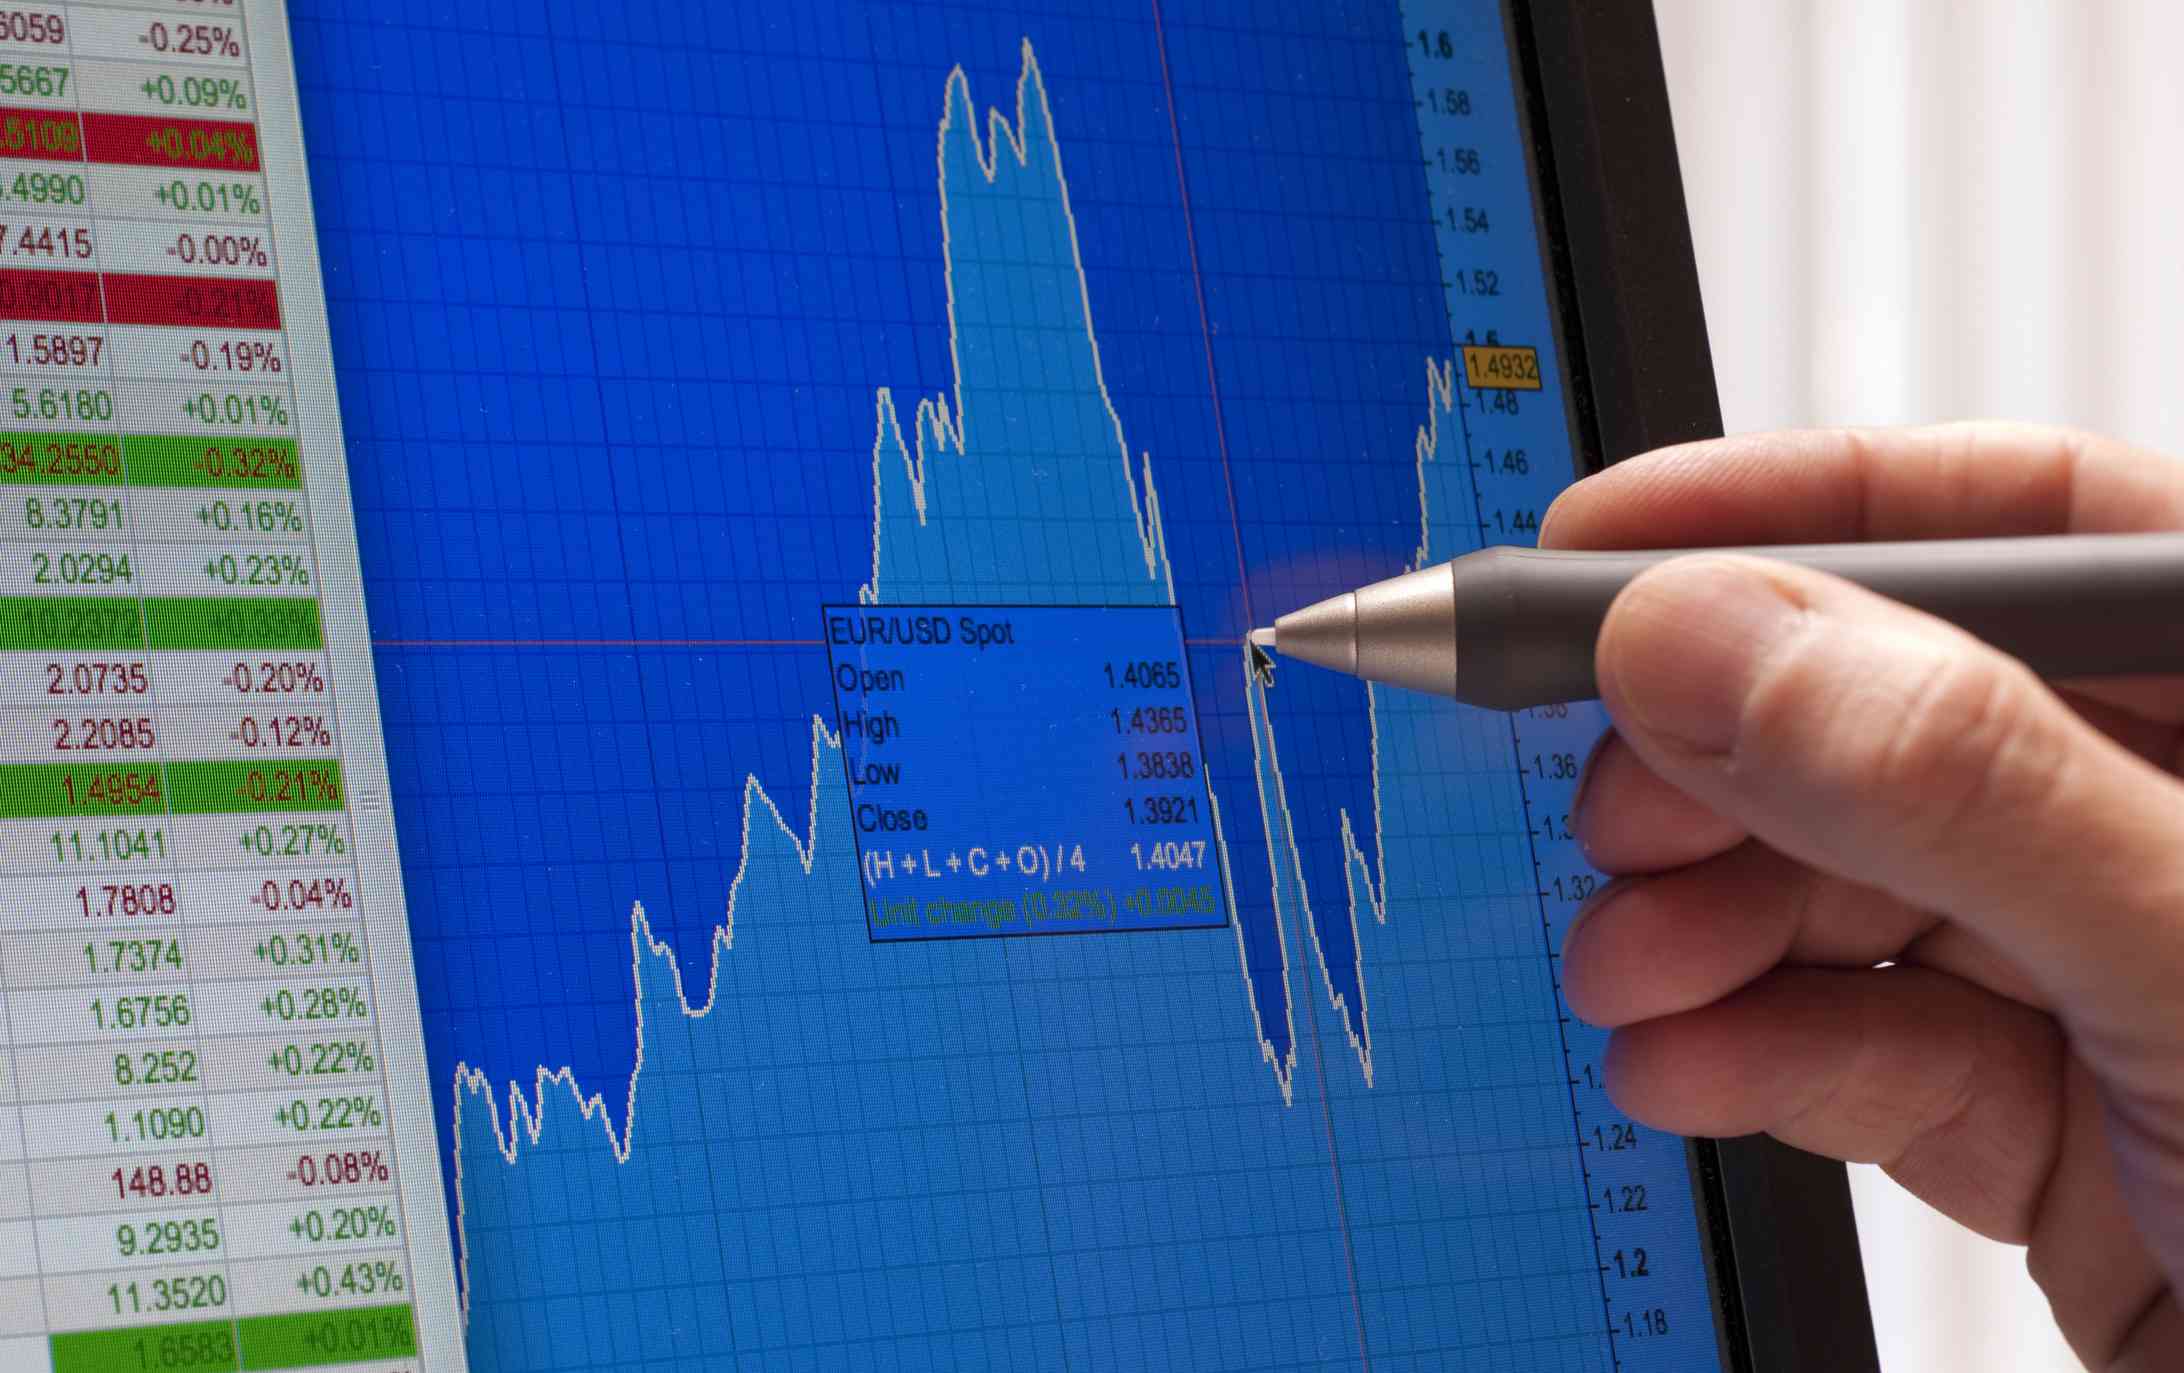 Close up on computer monitor showing financial market chart